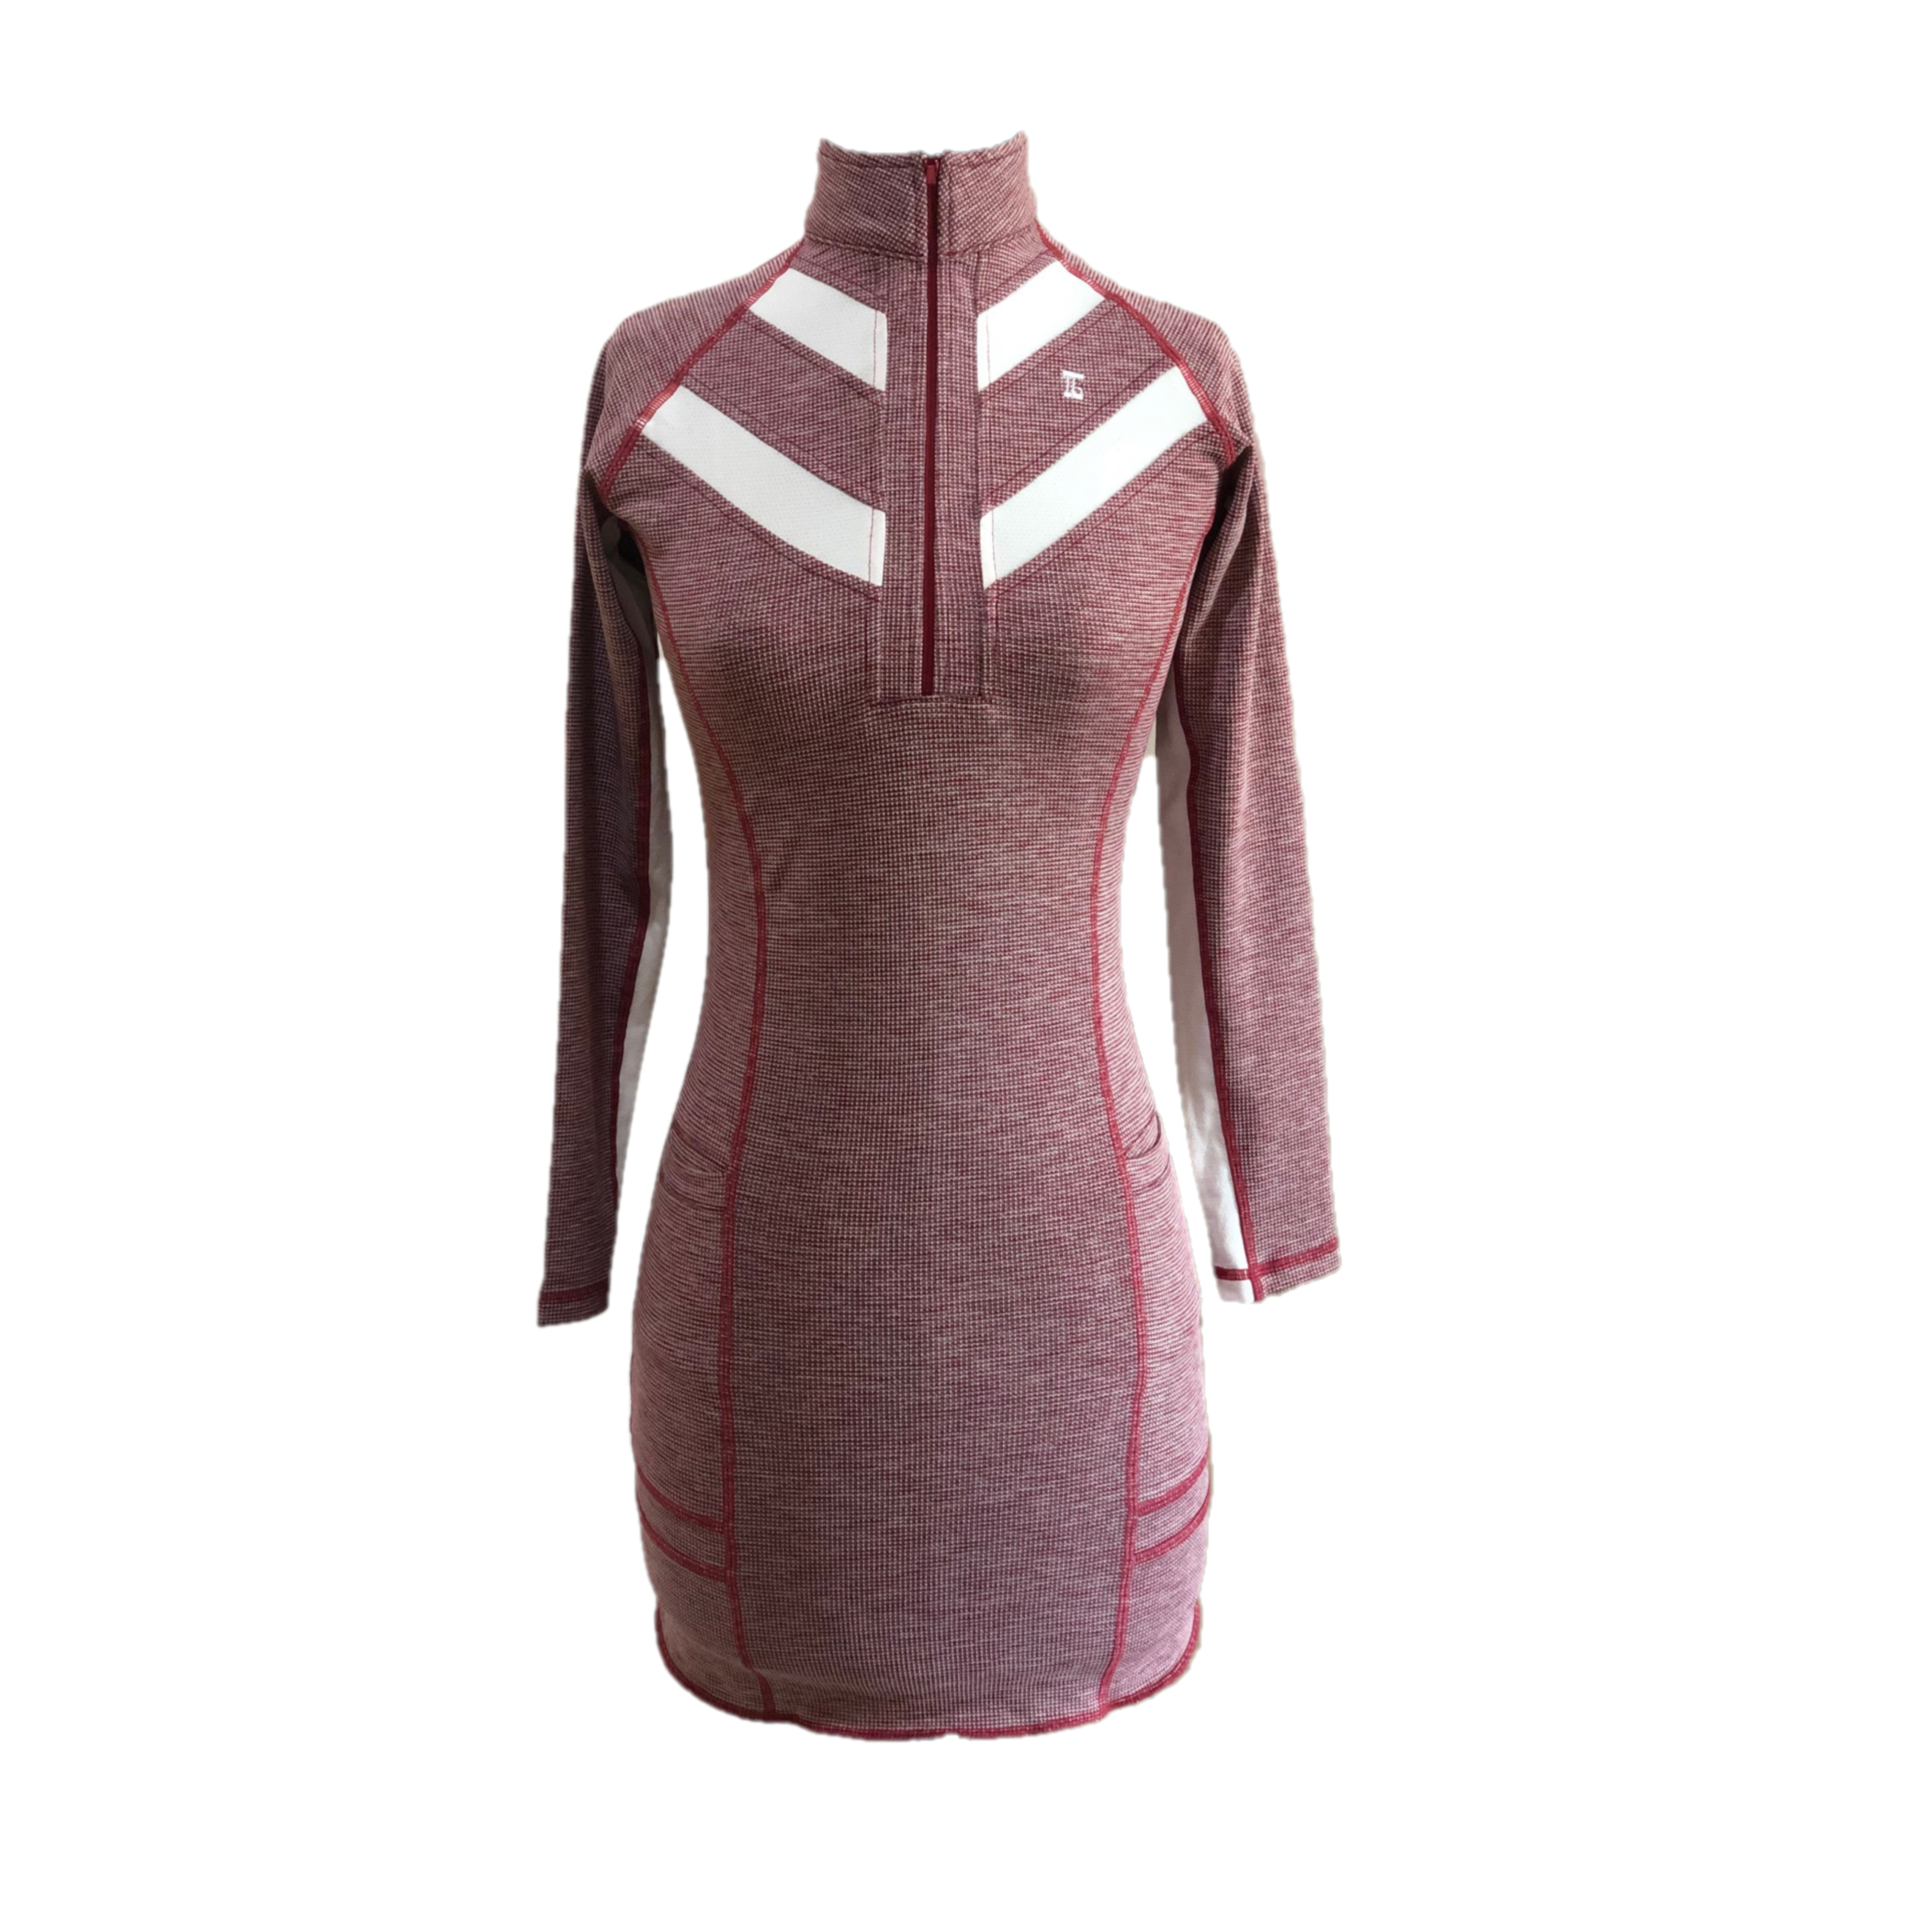 GD-019 || Golf Dress Long Sleeved Maroon Marble  and White Tweed Featured Over Locked Seems with Double Hem Overlocking Textured Fabric, wide back chevron stripes 2 each side of front collar, zip mock polo neck, 2 front pockets with black trim